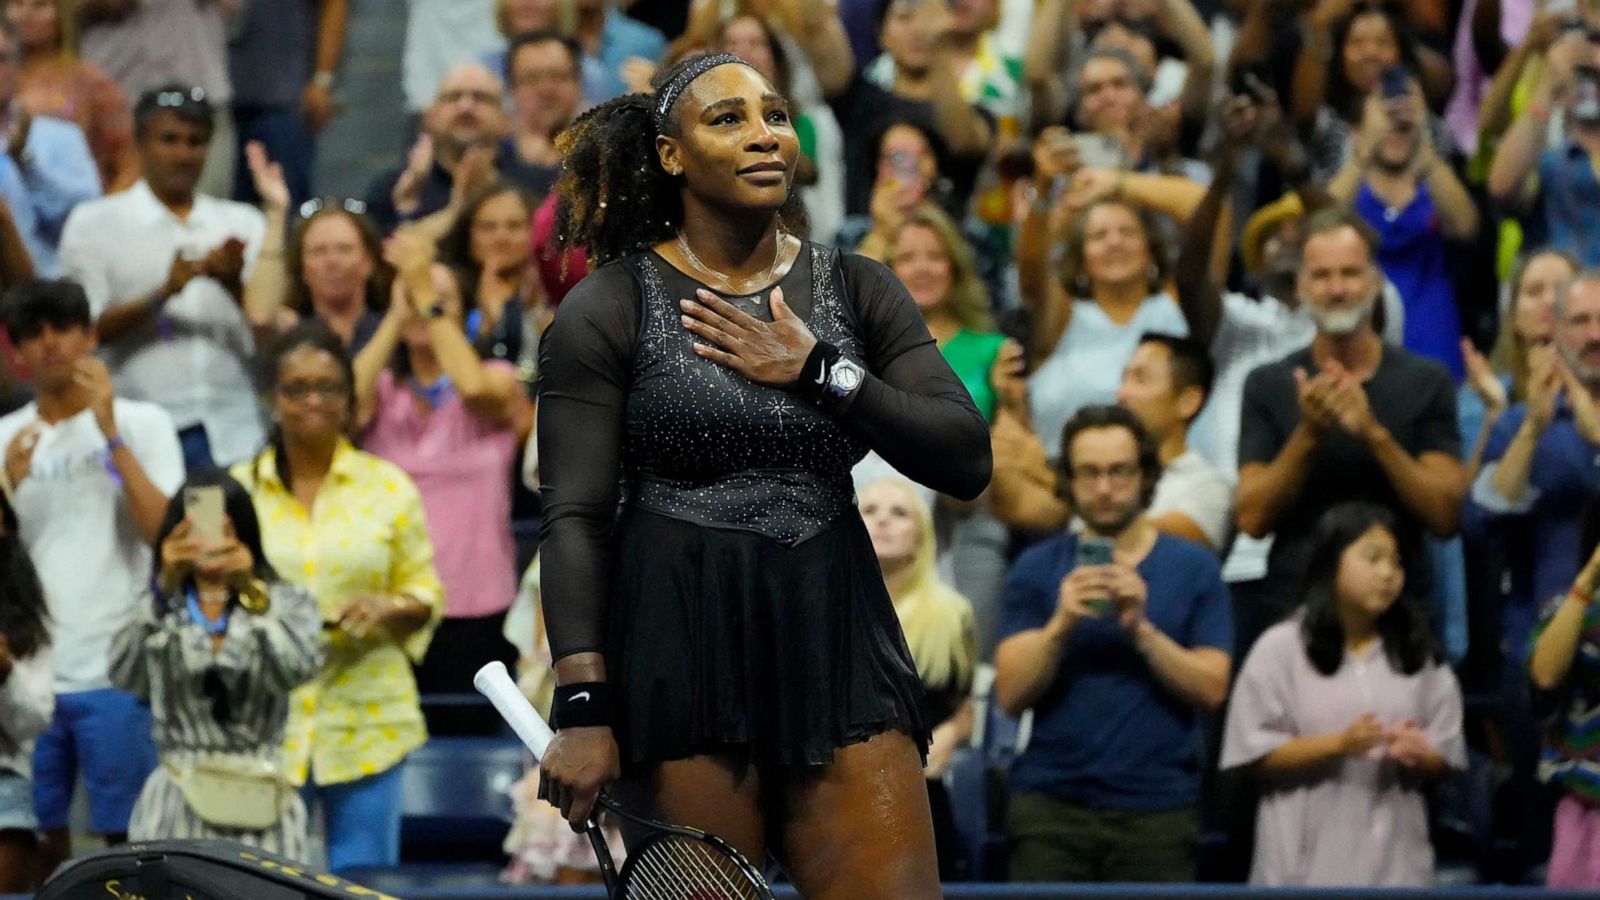 While Serena Williams Plays Her Final Matches At U.S. Open, Here's How  She's Building Her Off-Court Investing